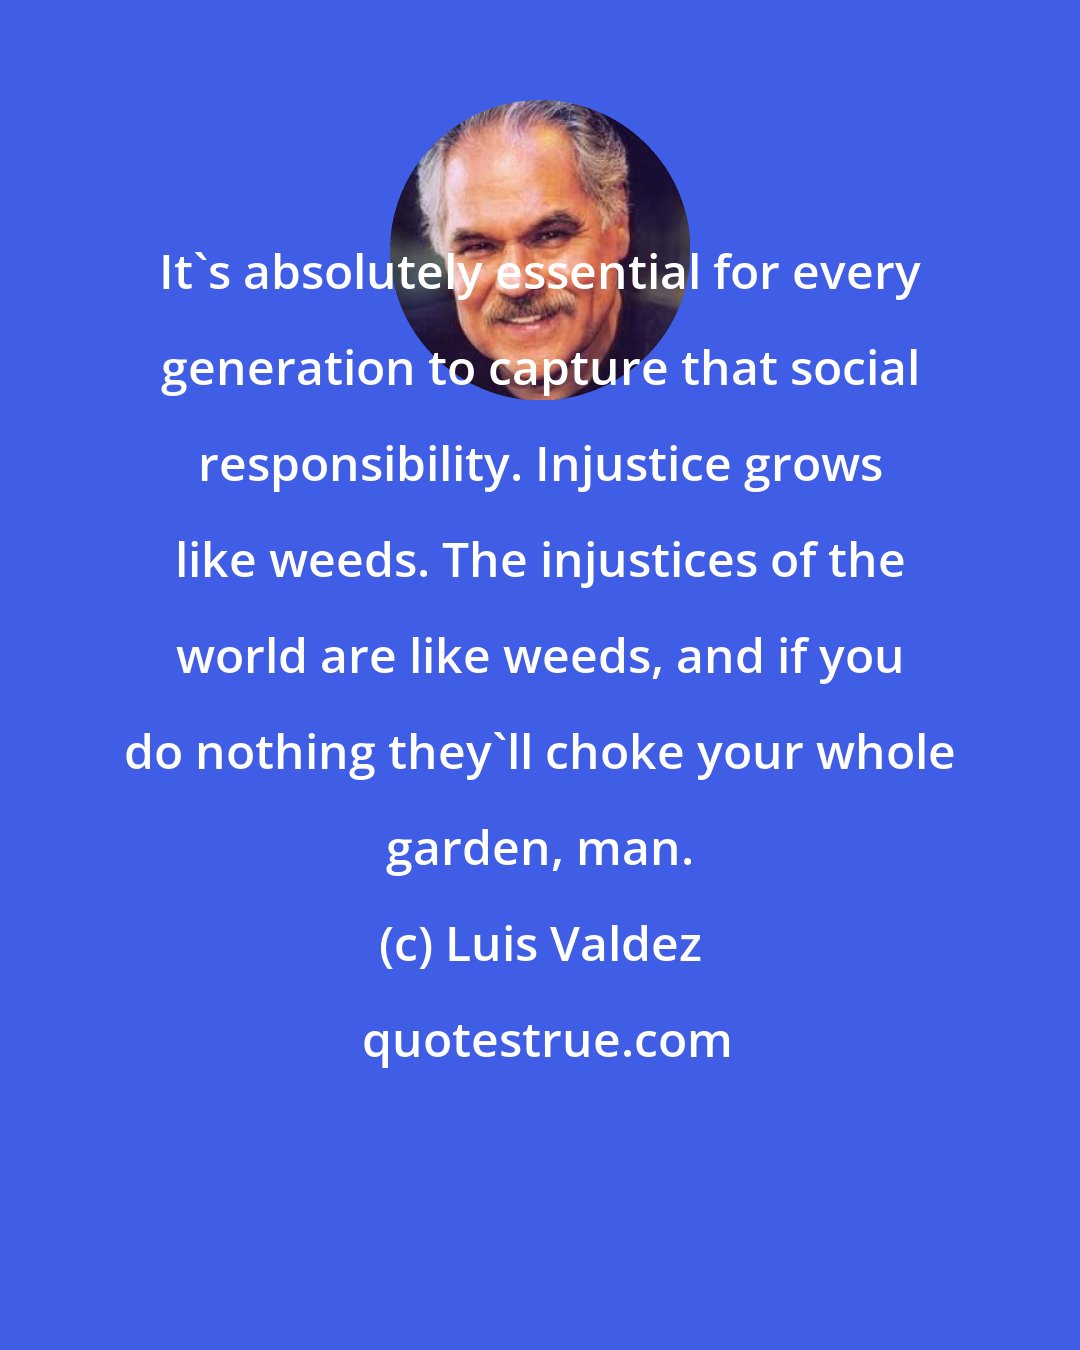 Luis Valdez: It's absolutely essential for every generation to capture that social responsibility. Injustice grows like weeds. The injustices of the world are like weeds, and if you do nothing they'll choke your whole garden, man.